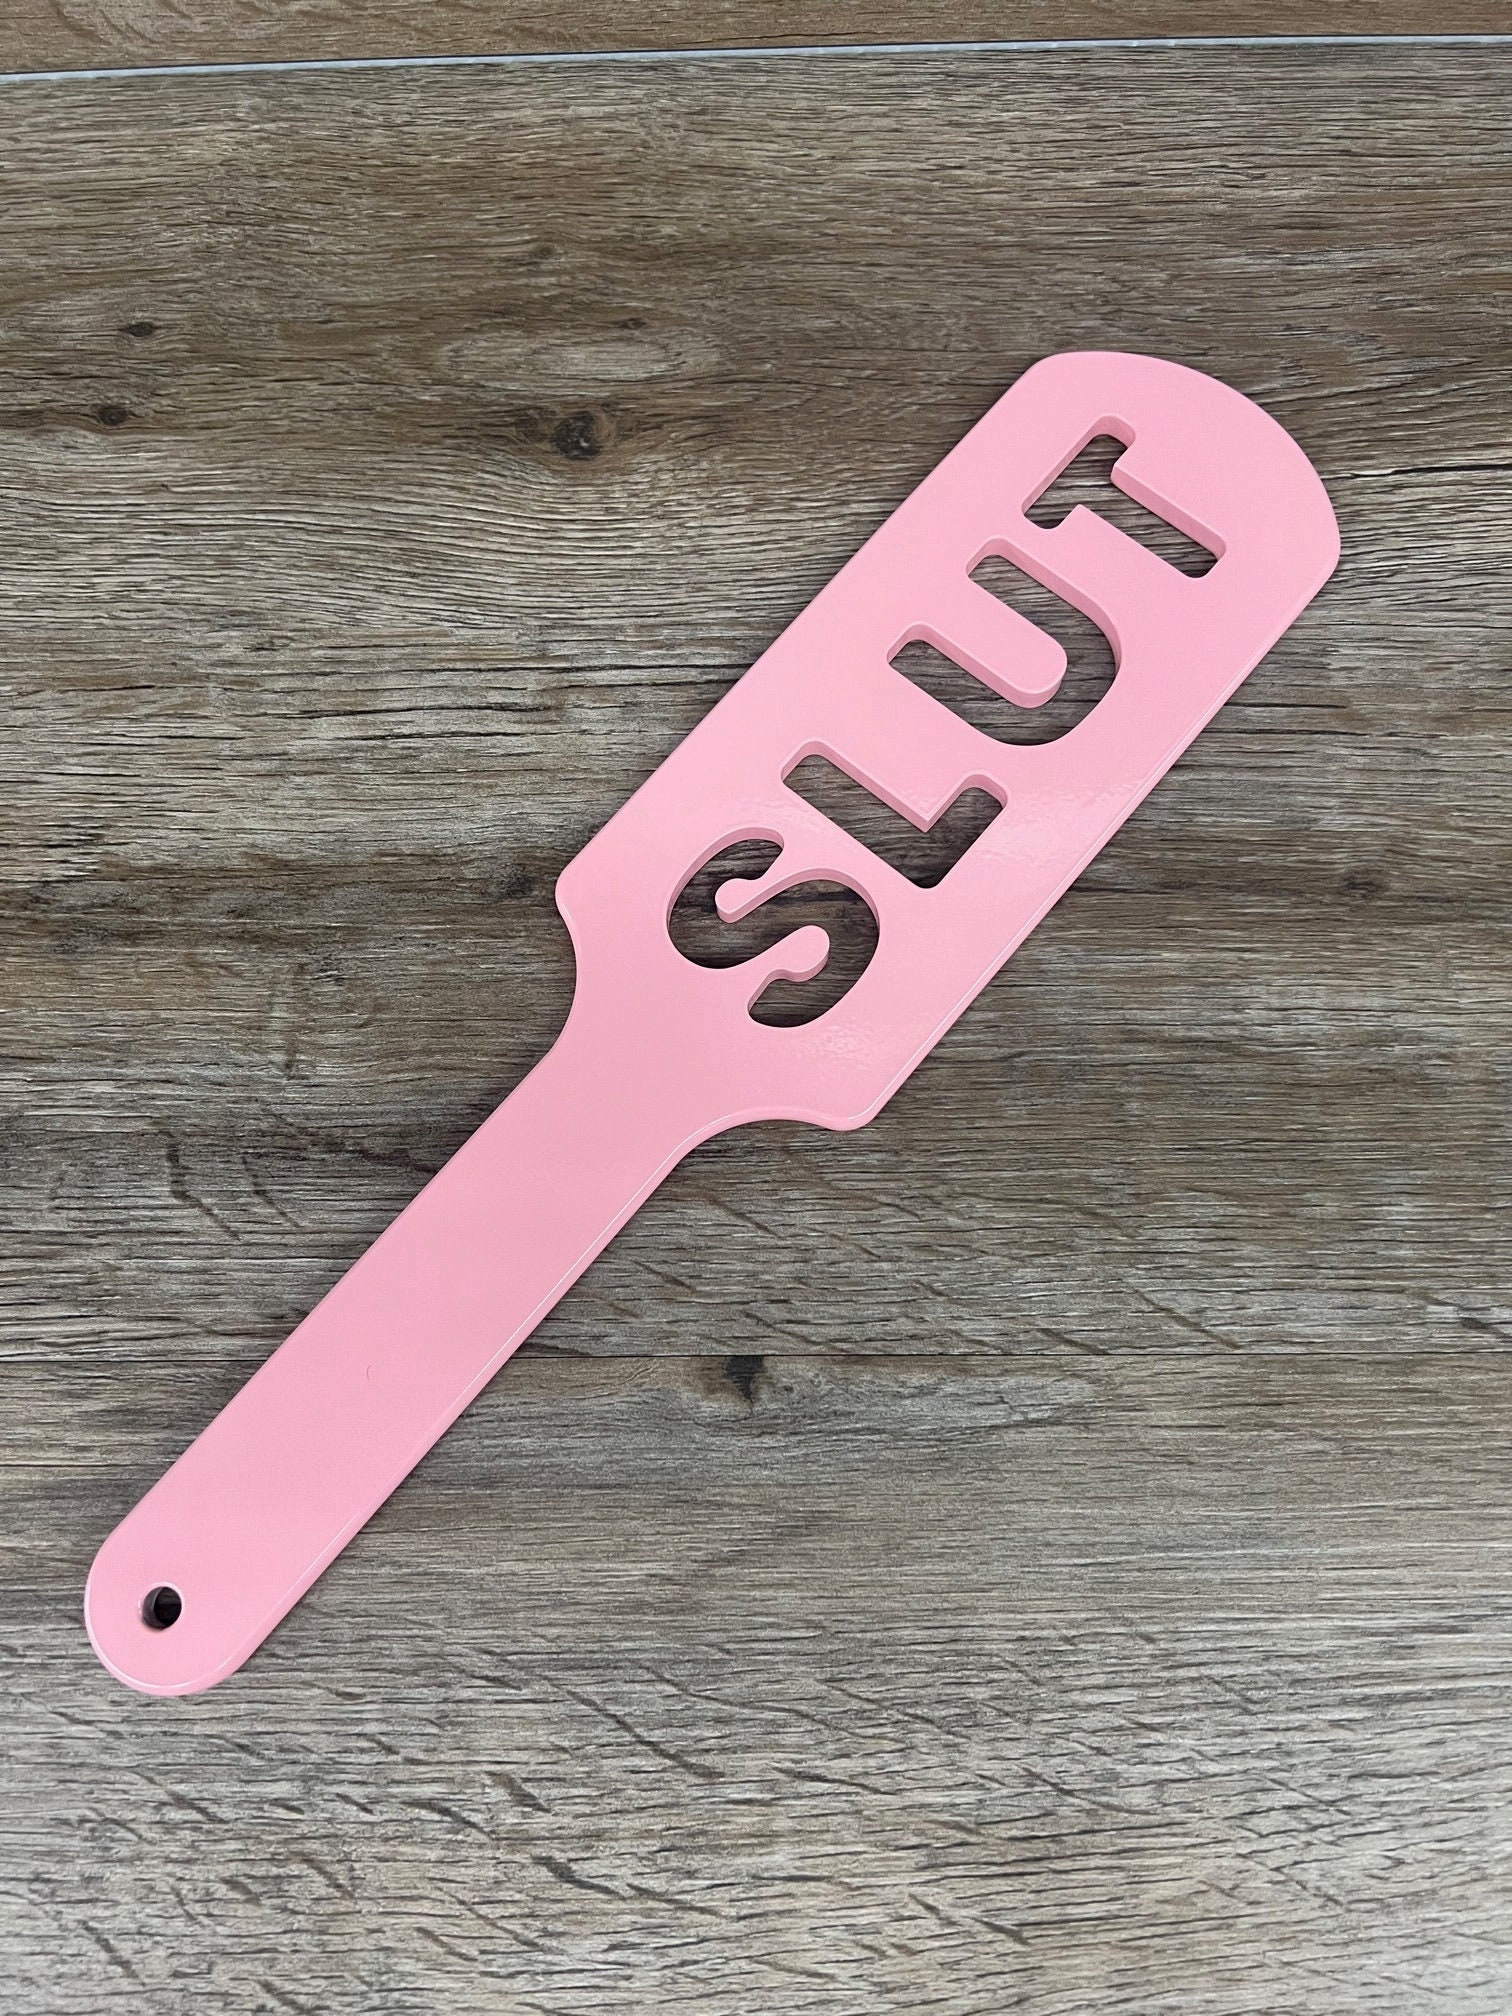 Large Plastic Spank Me Harder Sex Paddle Freaky Kinky with or without Studs